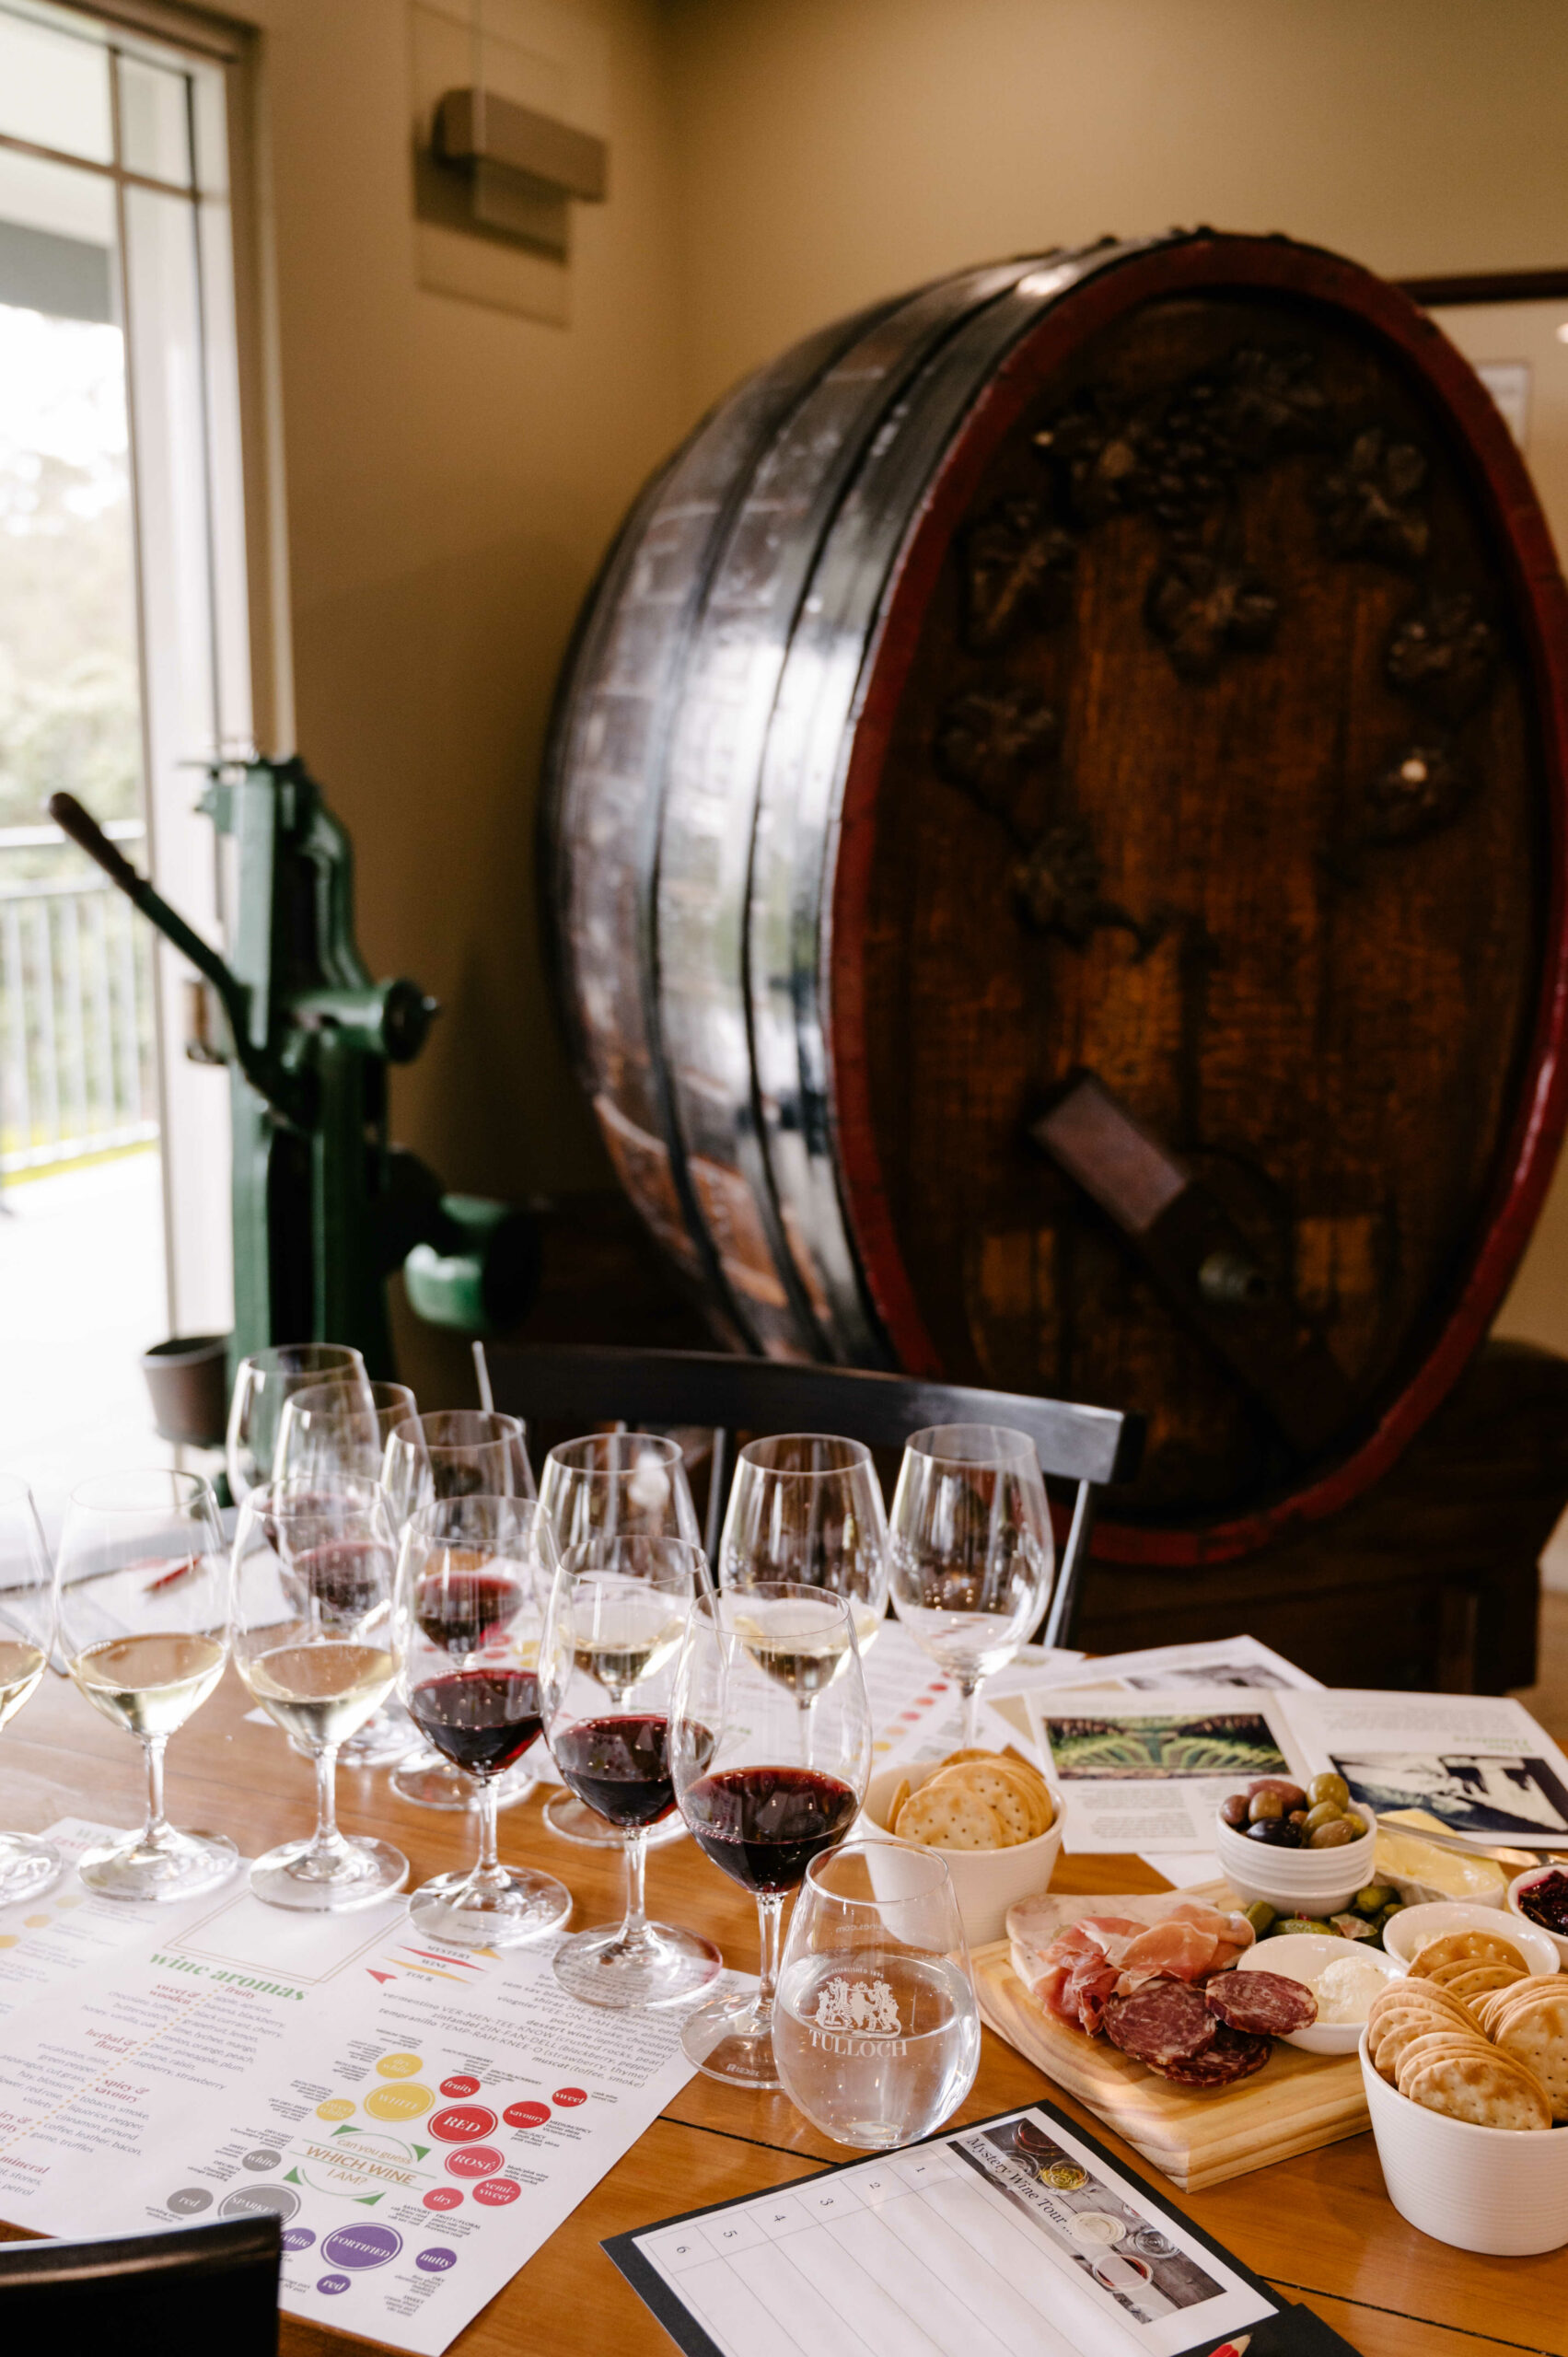 Tulloch Wines - Mystery Wine Tasting Experience with Local Cheese and Charcuterie